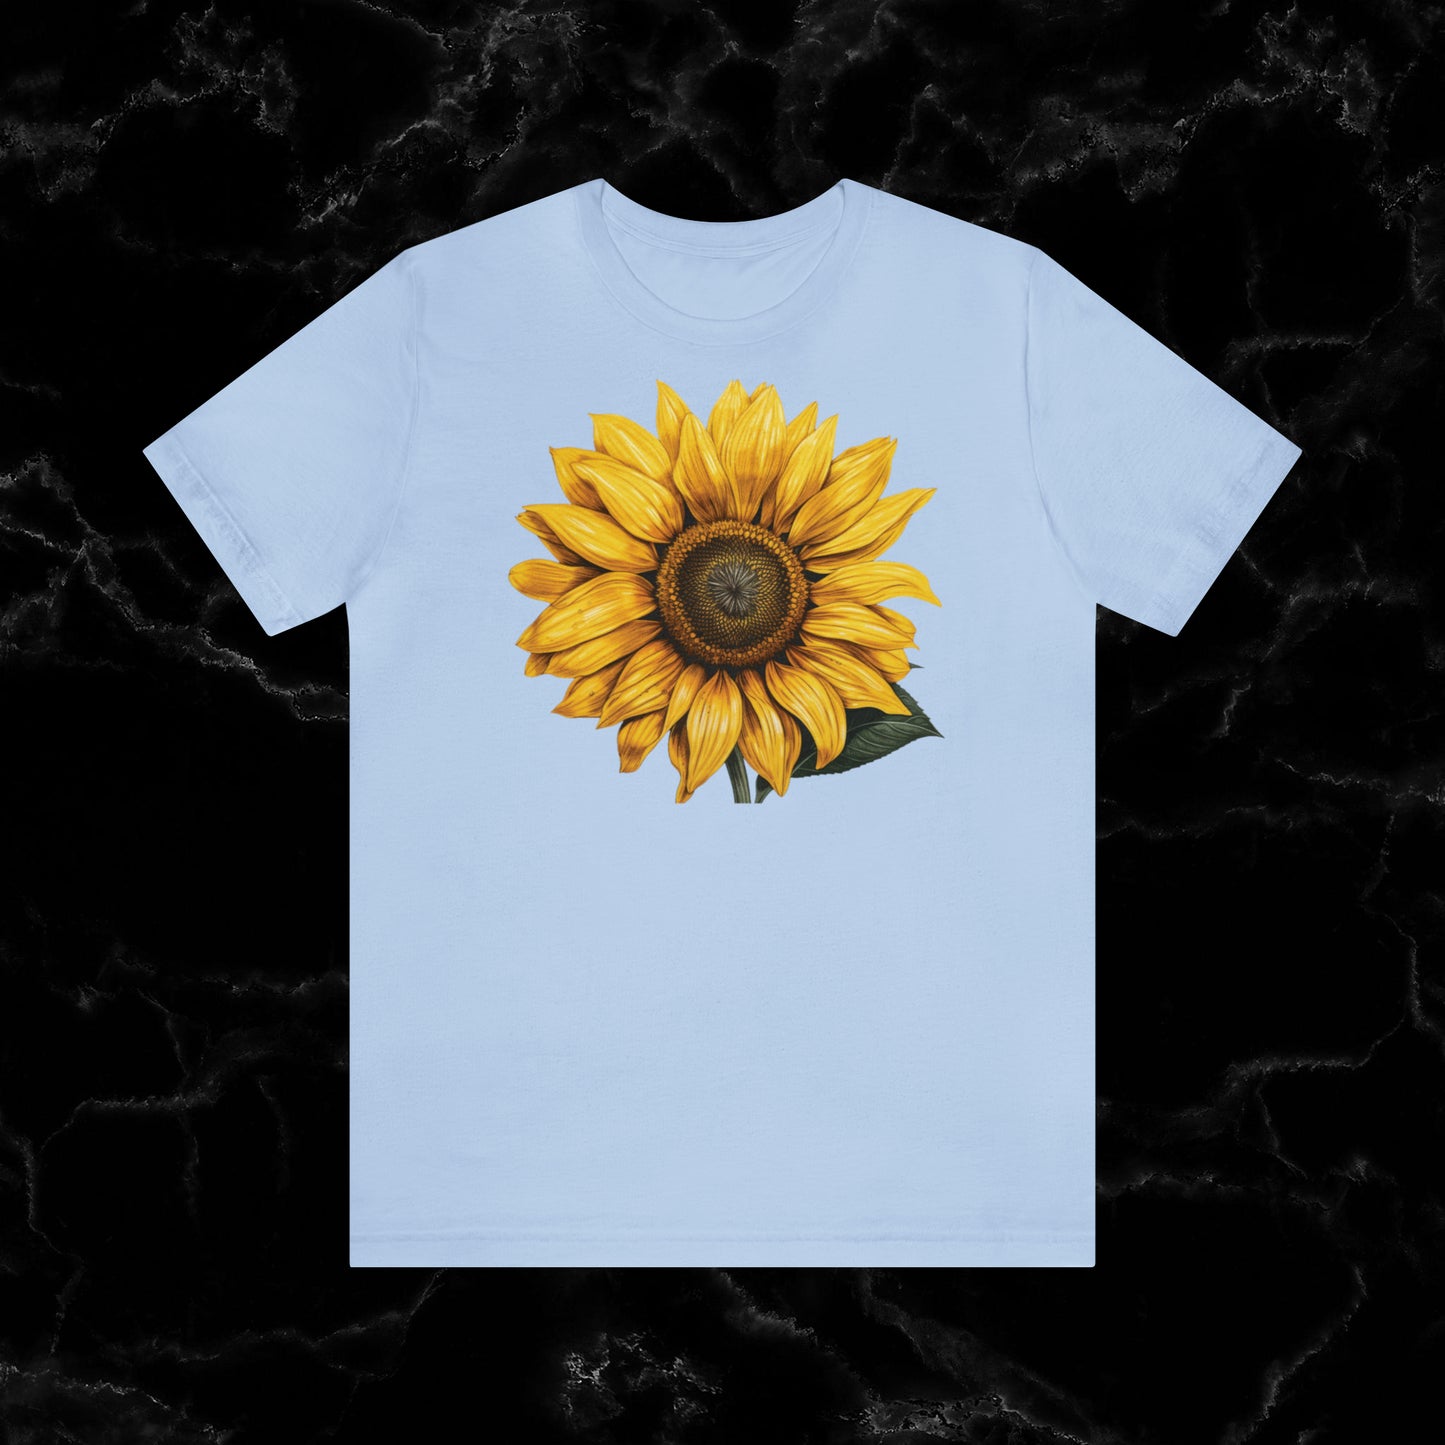 Sunflower Shirt Collection - Floral Tee, Garden Shirt, and Women's Fall Fashion Staples T-Shirt Baby Blue S 